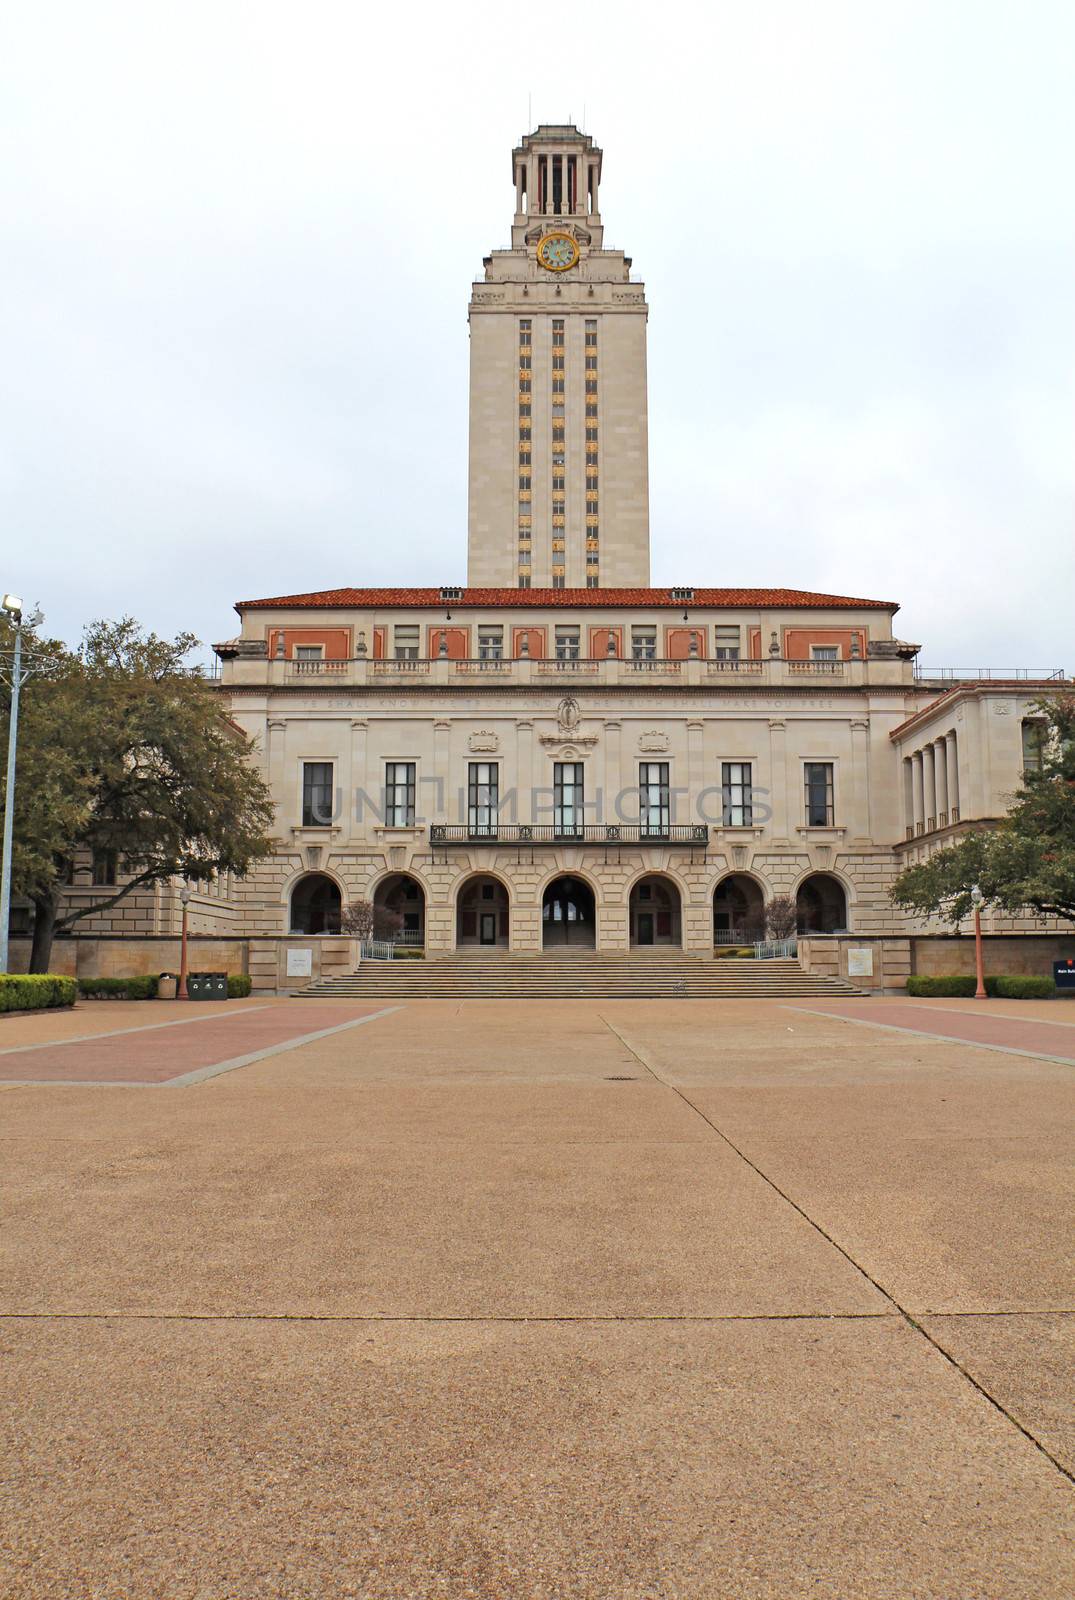 Main Building (or The Tower) on the campus of the University of Texas at Austin against a cloudy sky vertical. This clock tower was completed in 1937 and is a main focal point of the campus.